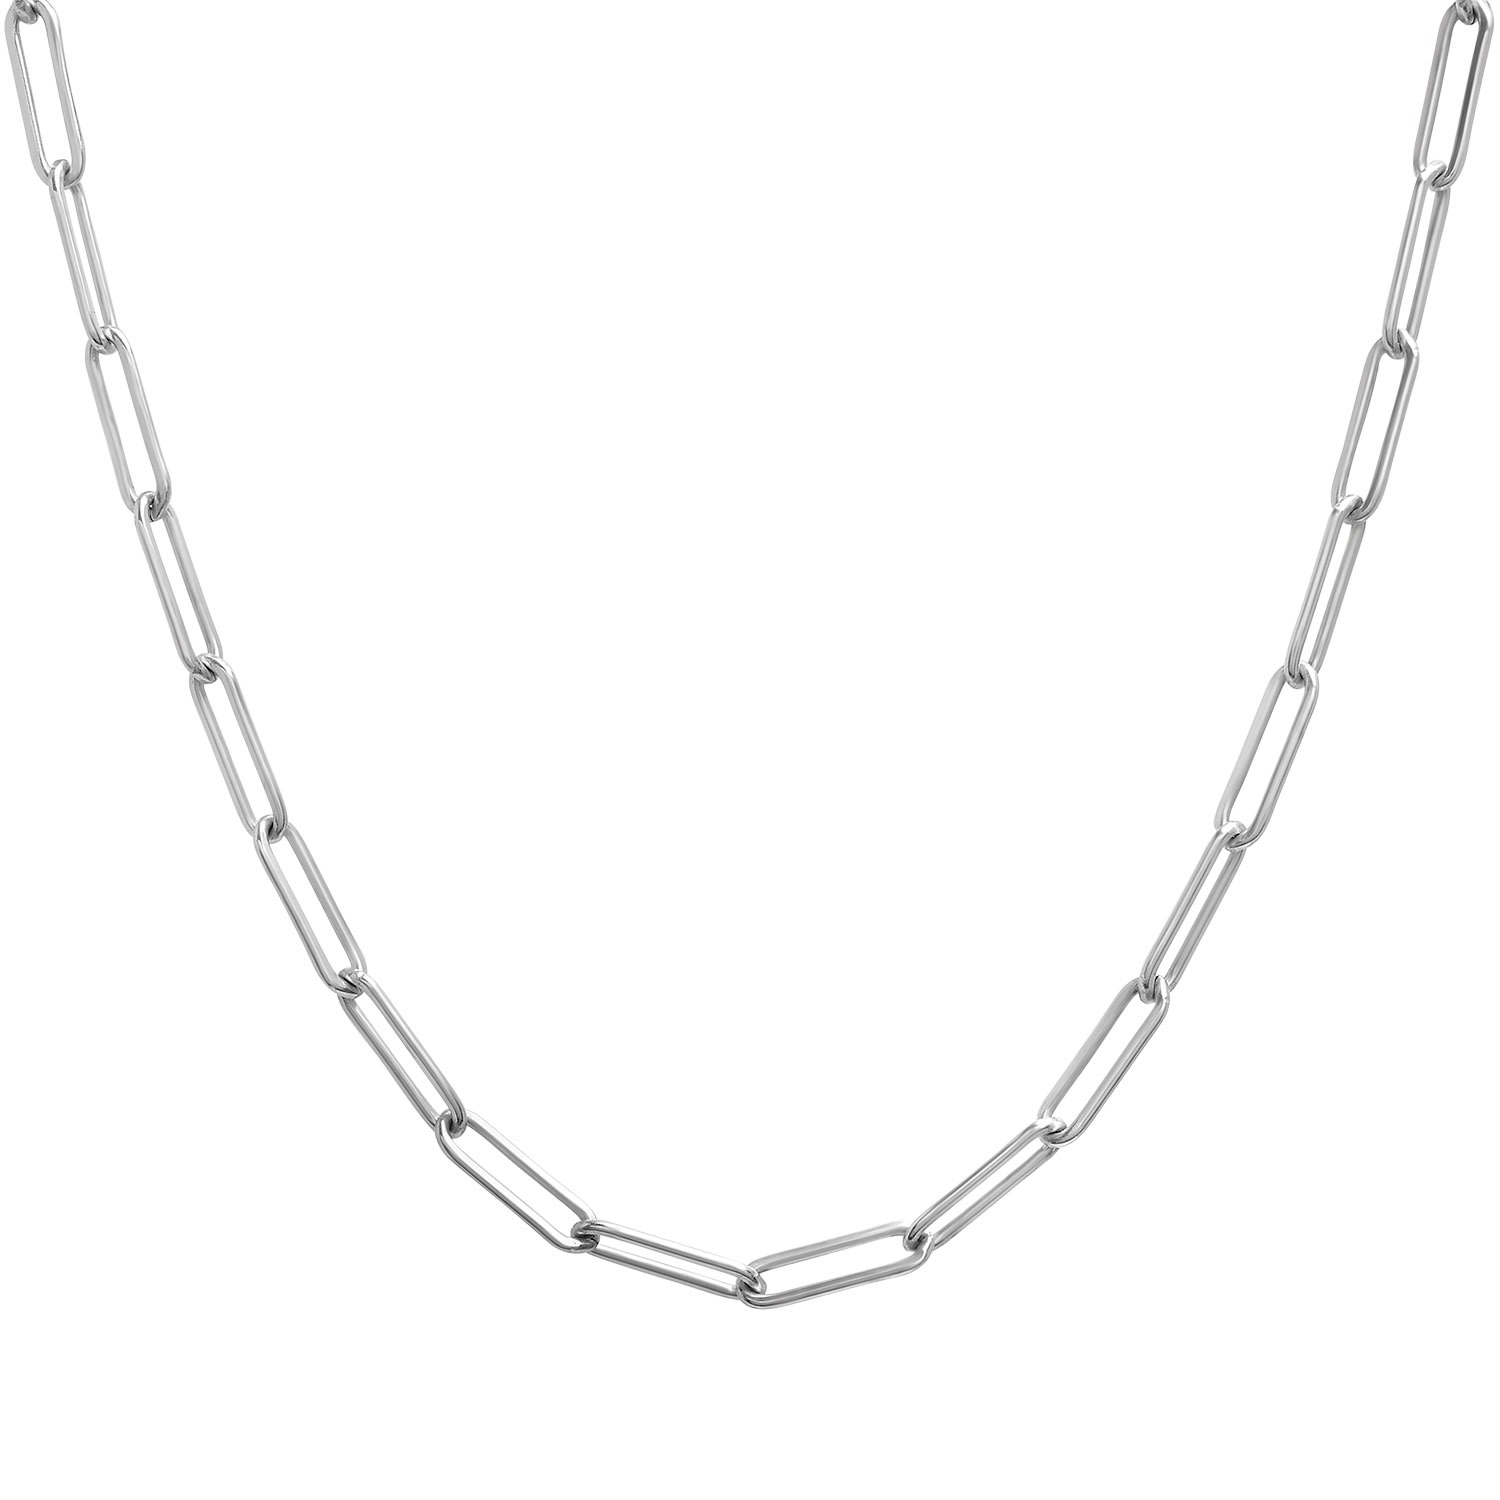 Women's Silver Paperclip Chain Necklace With Toggle Closure Miki & Jane